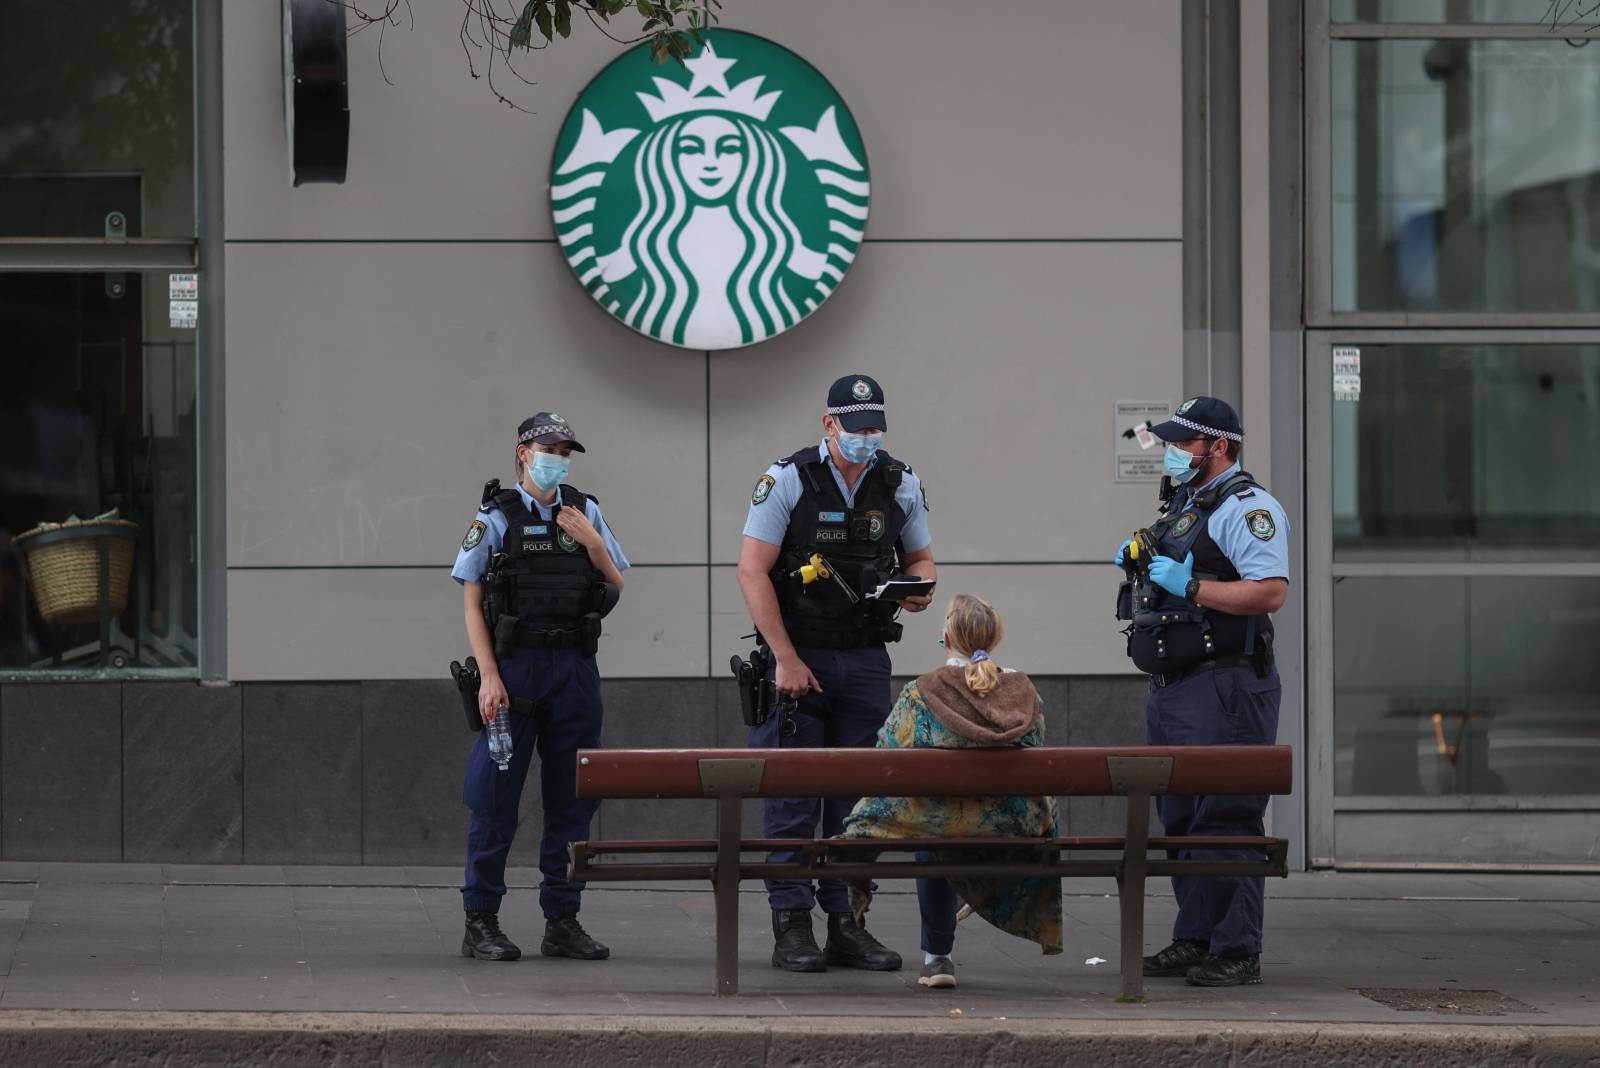 Police look to stop an anti-lockdown protest as a COVID-19 outbreak affects Sydney